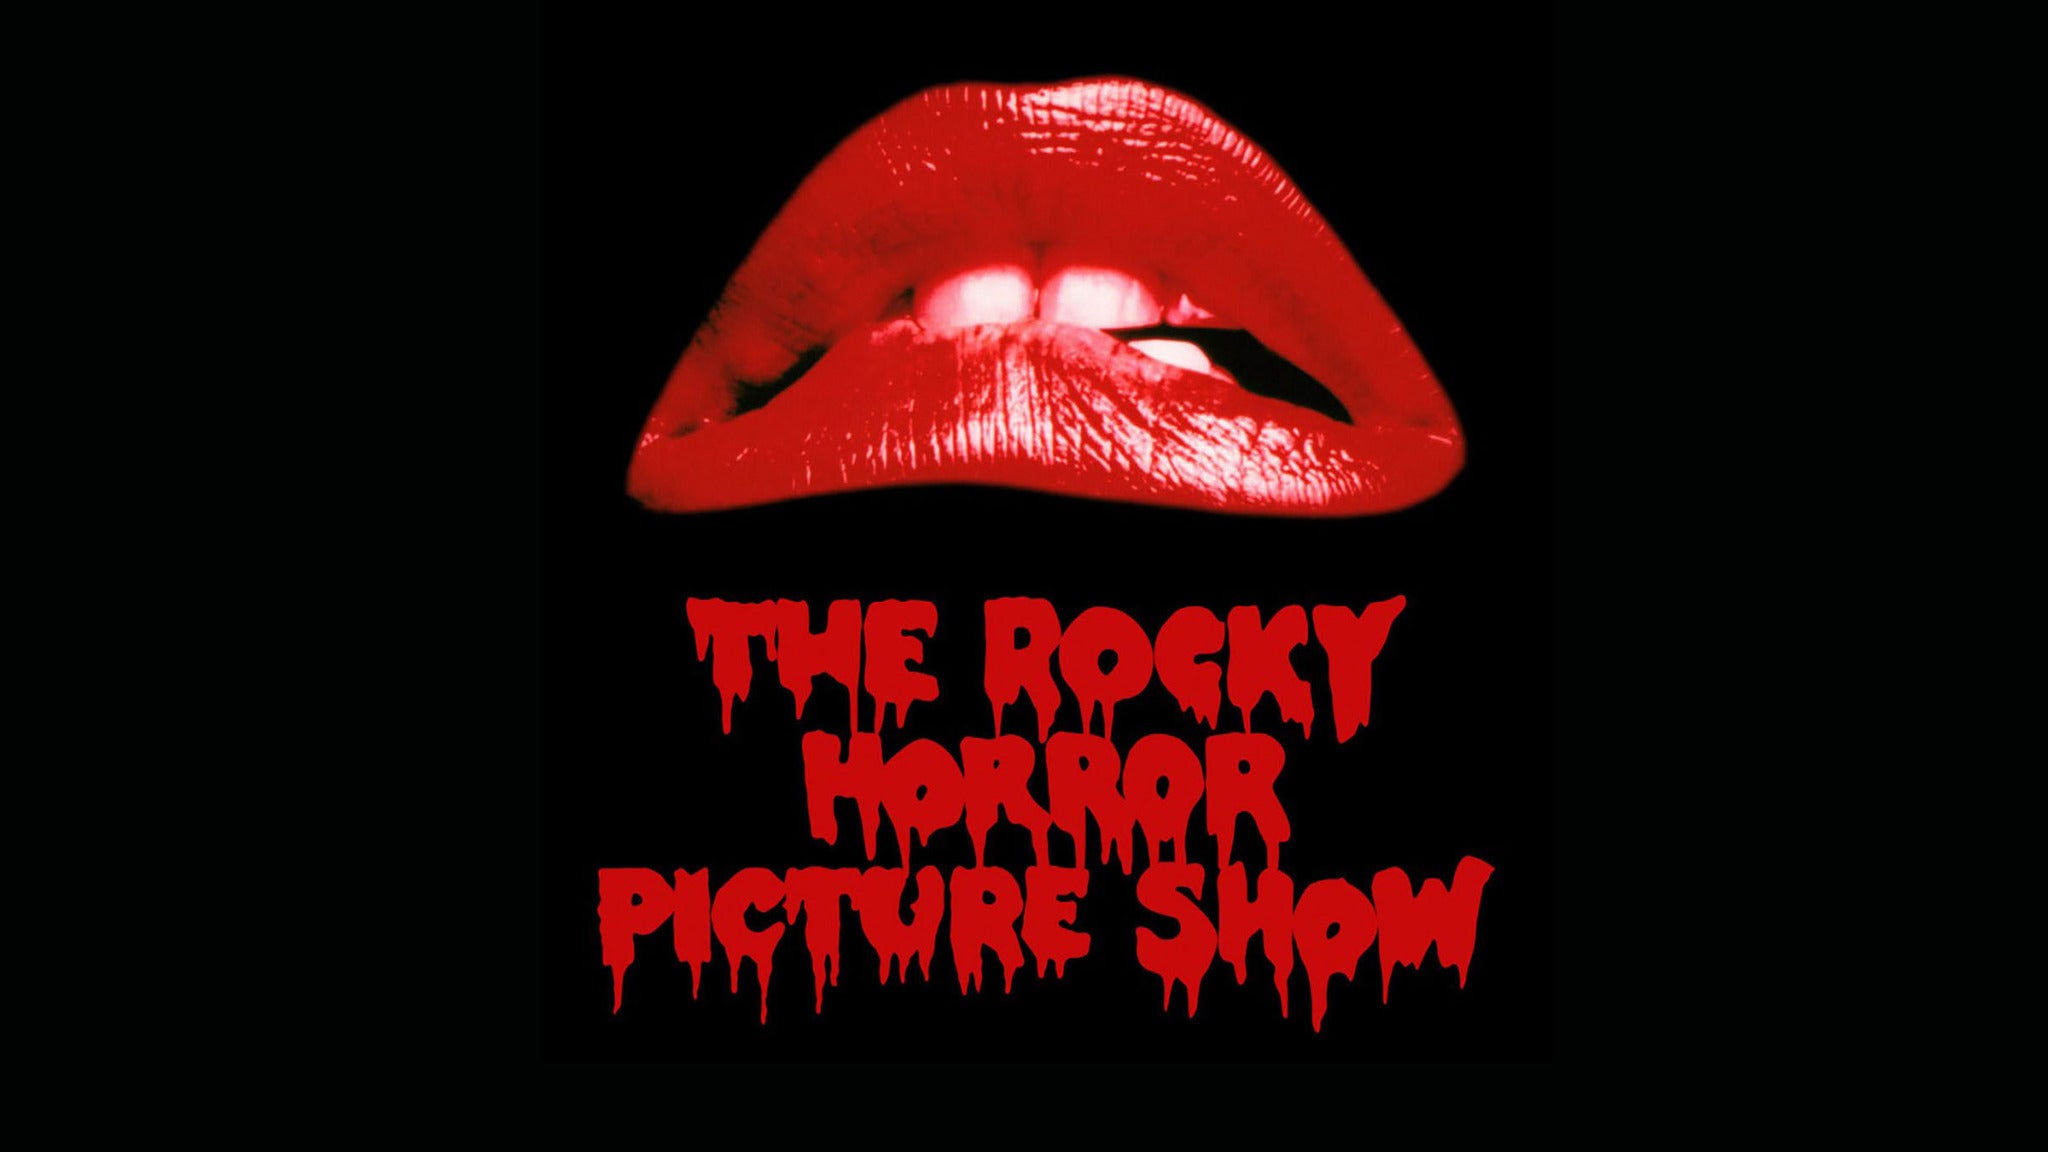 new presale code for The Rocky Horror Picture Show 48th Anniversary Spectacular Tour face value tickets in Washington at Lincoln Theatre